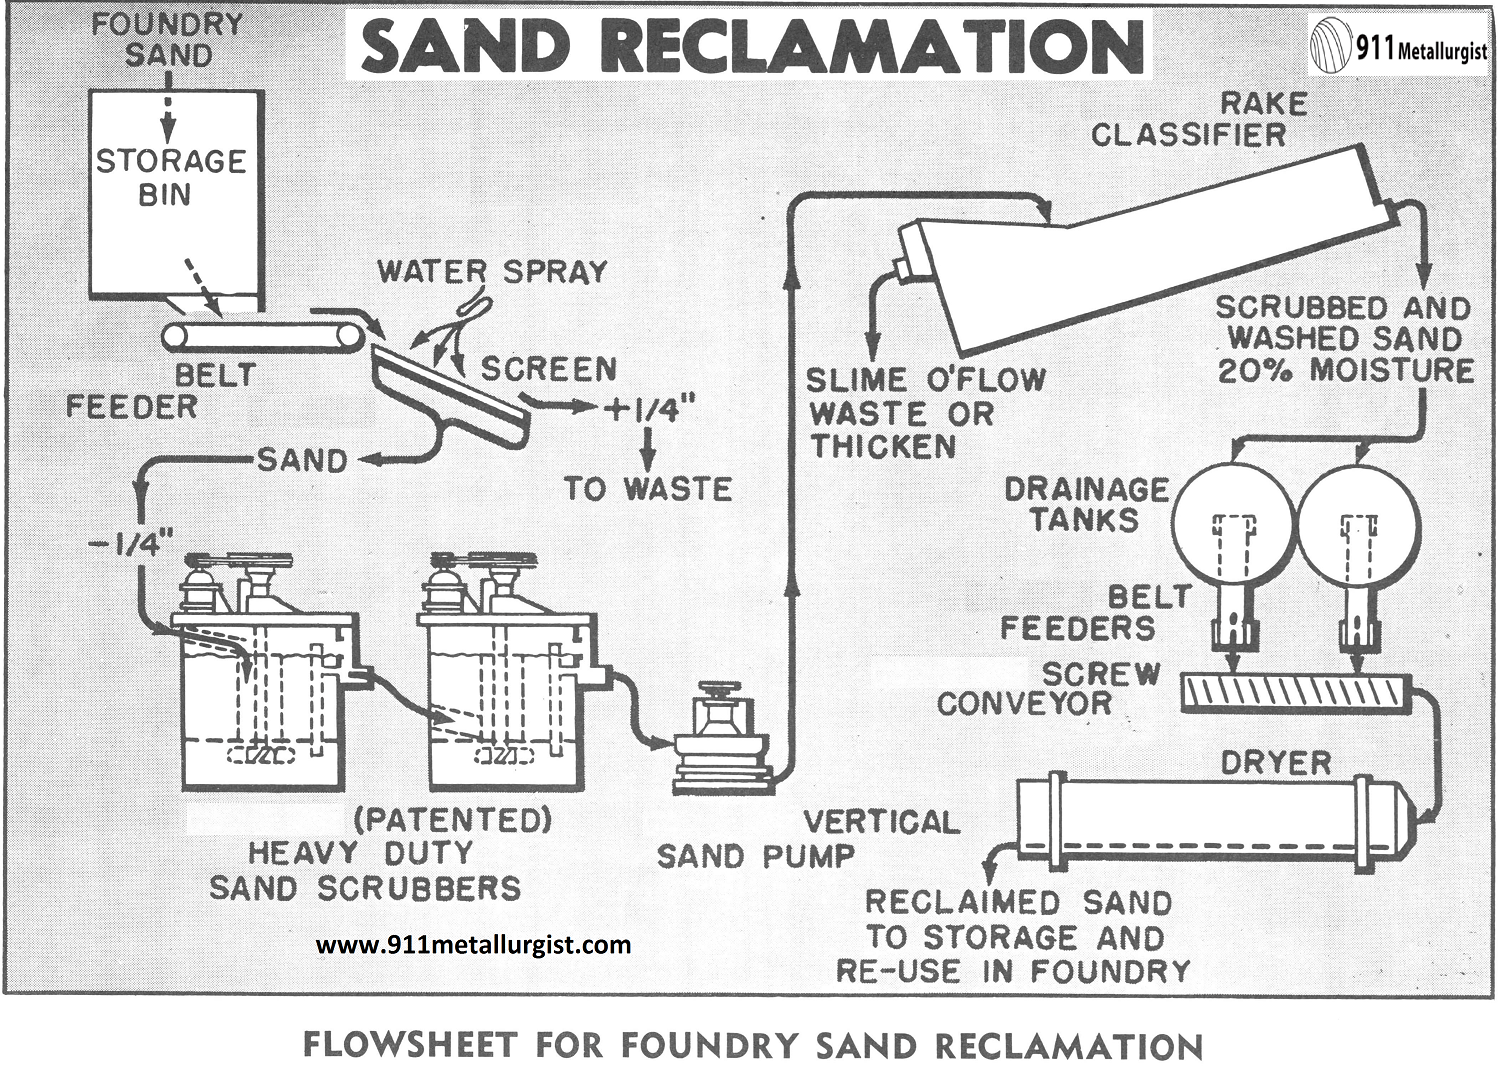 Flowsheet for Foundry Sand Reclamation